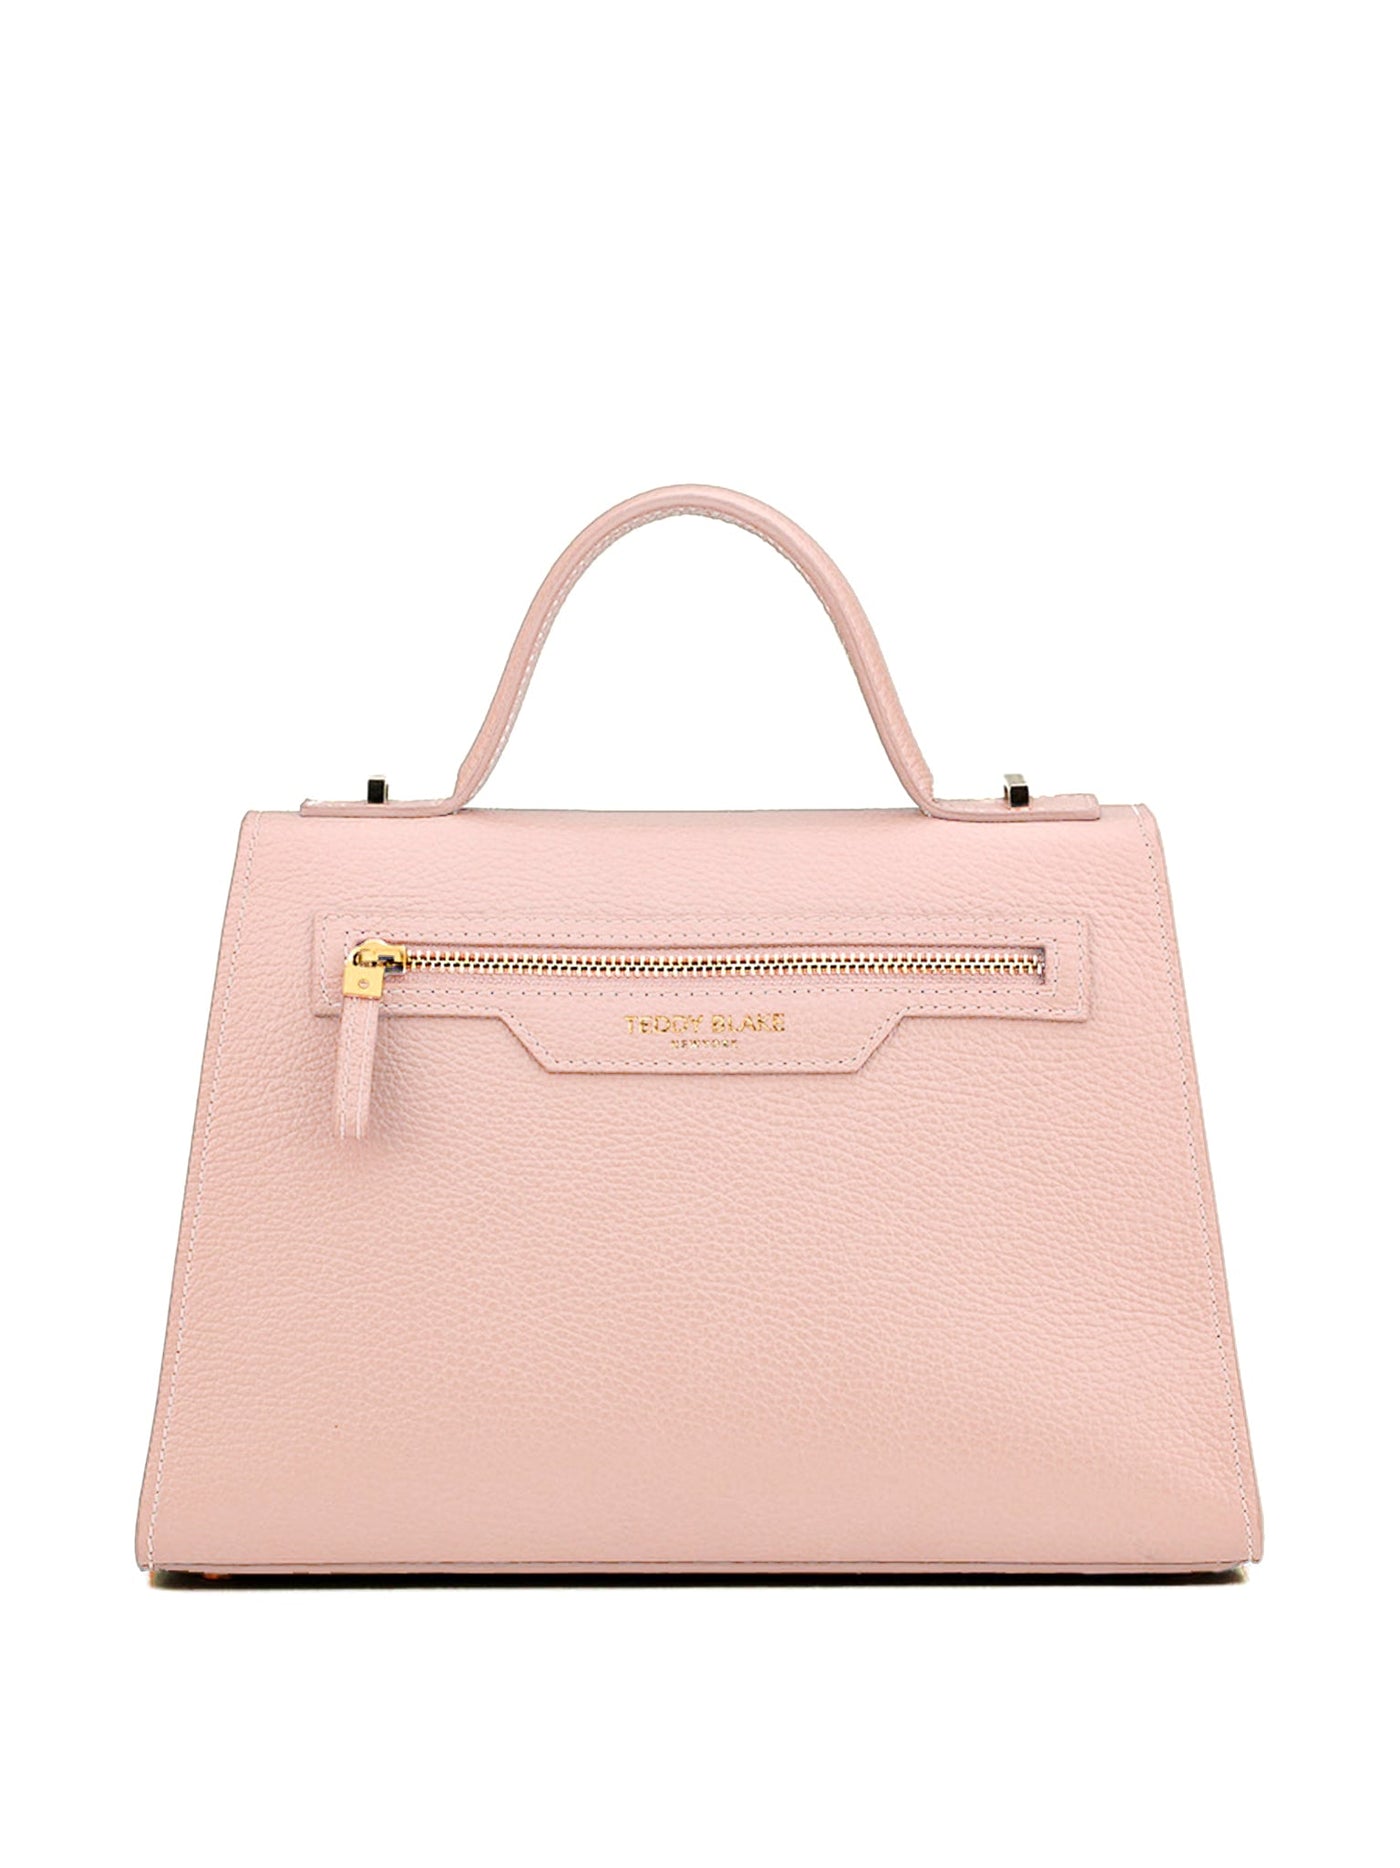 Ava Gold 14" - Pink